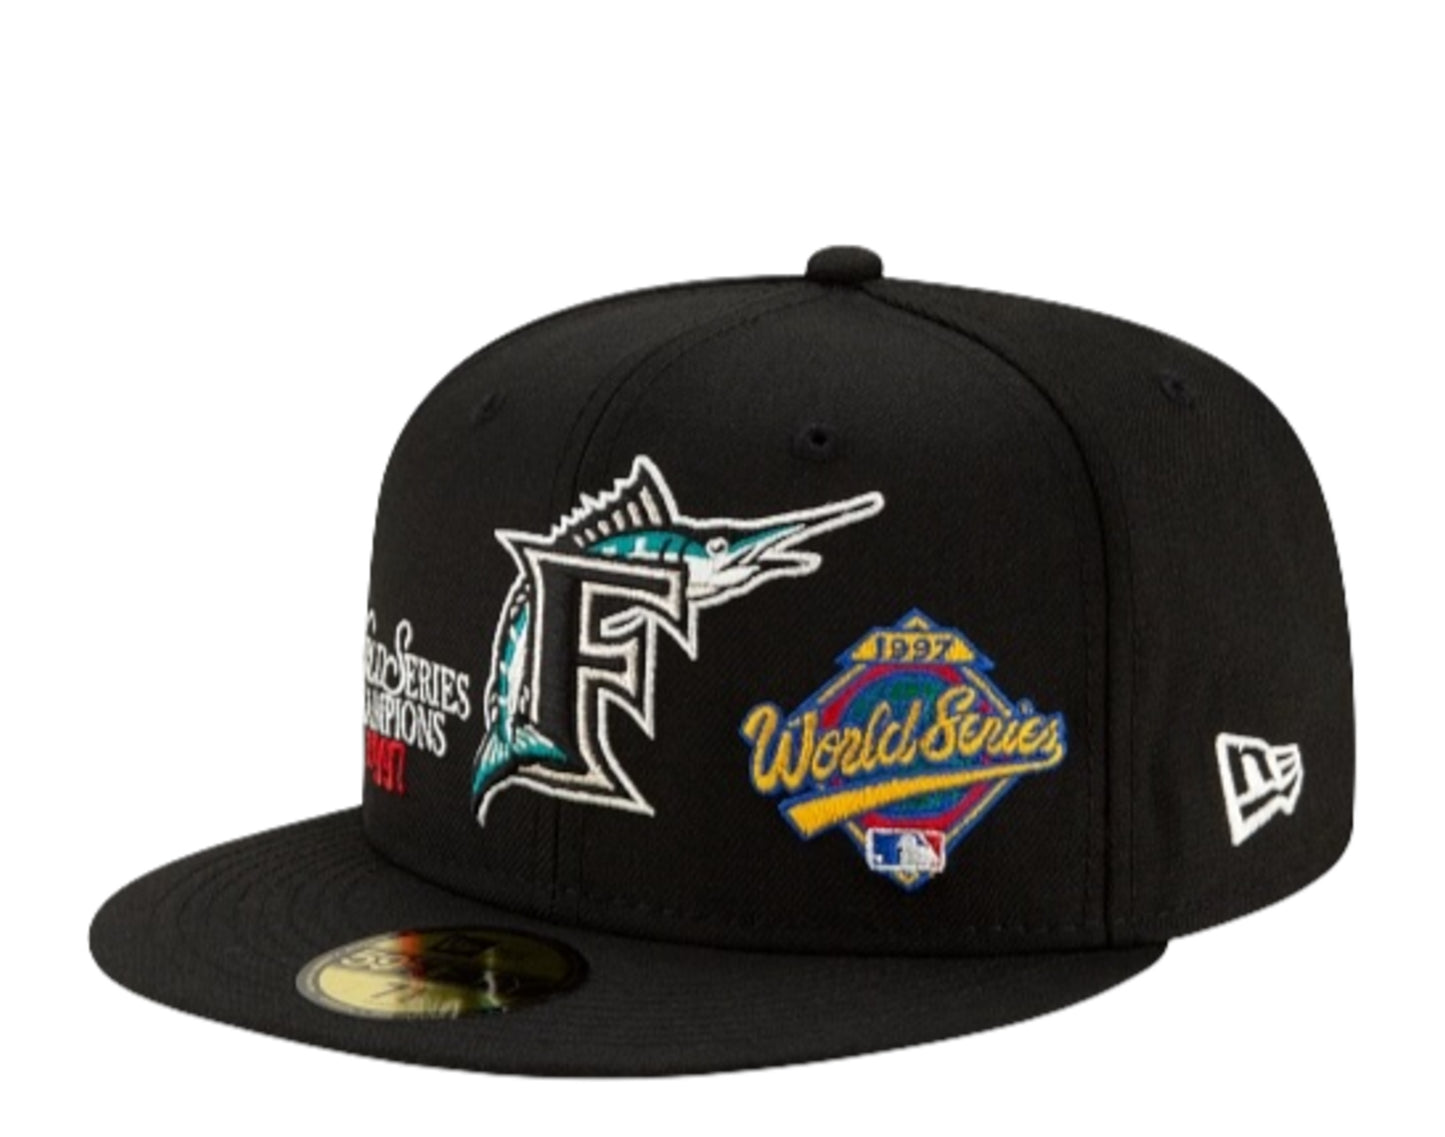 New Era 59Fifty Florida Marlins Champions Fitted Hat